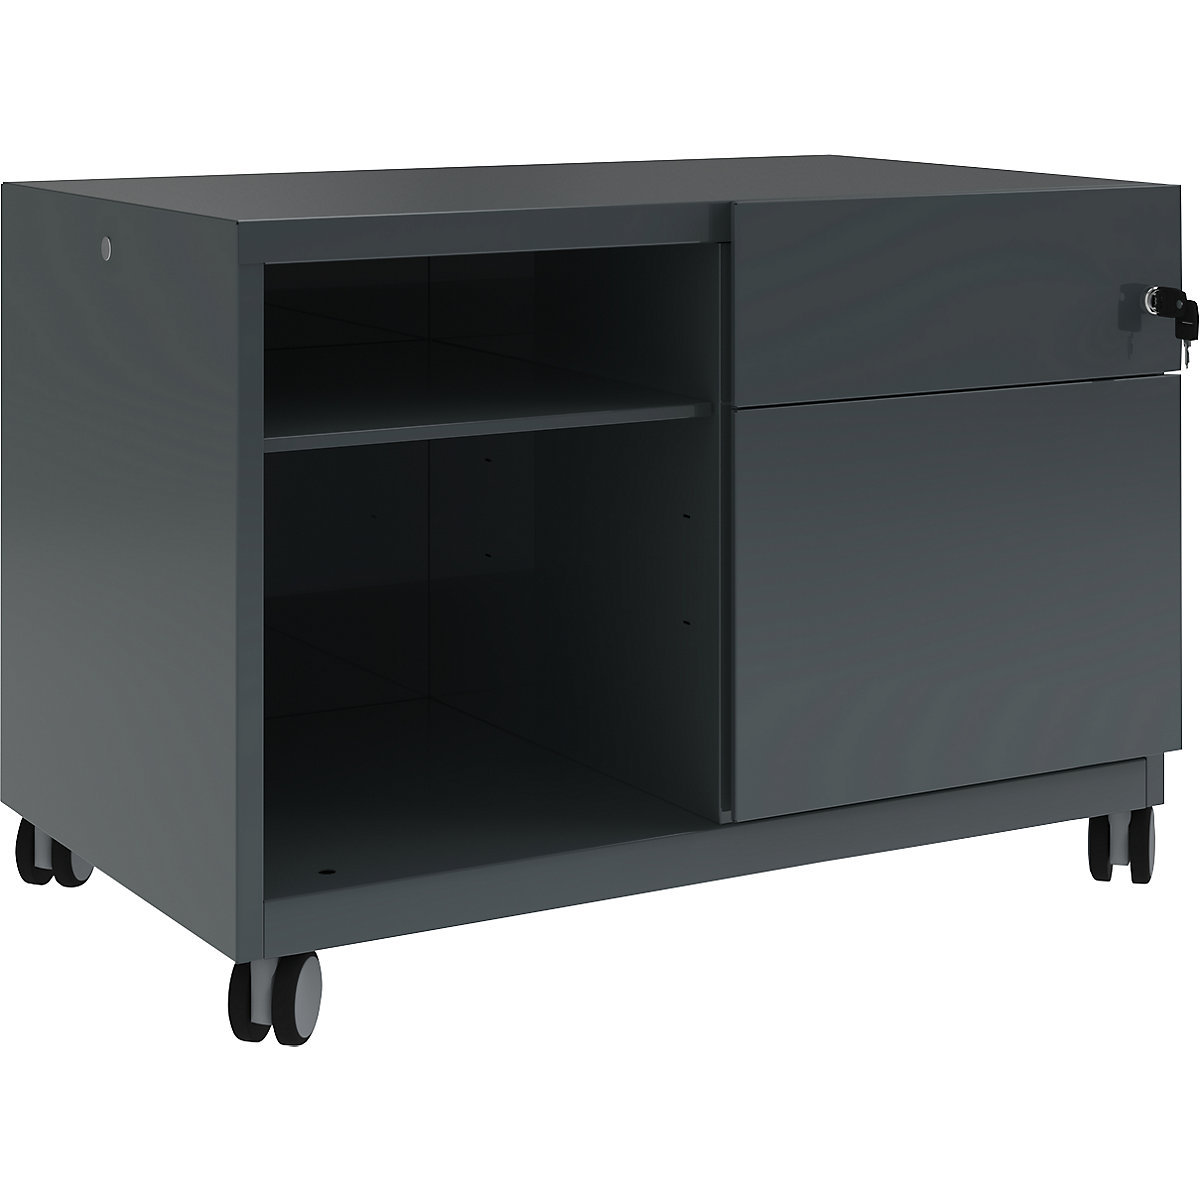 Note™ CADDY, HxBxT 563 x 800 x 490 mm – BISLEY, 1 universal drawer and suspension file drawer on the right, charcoal-33